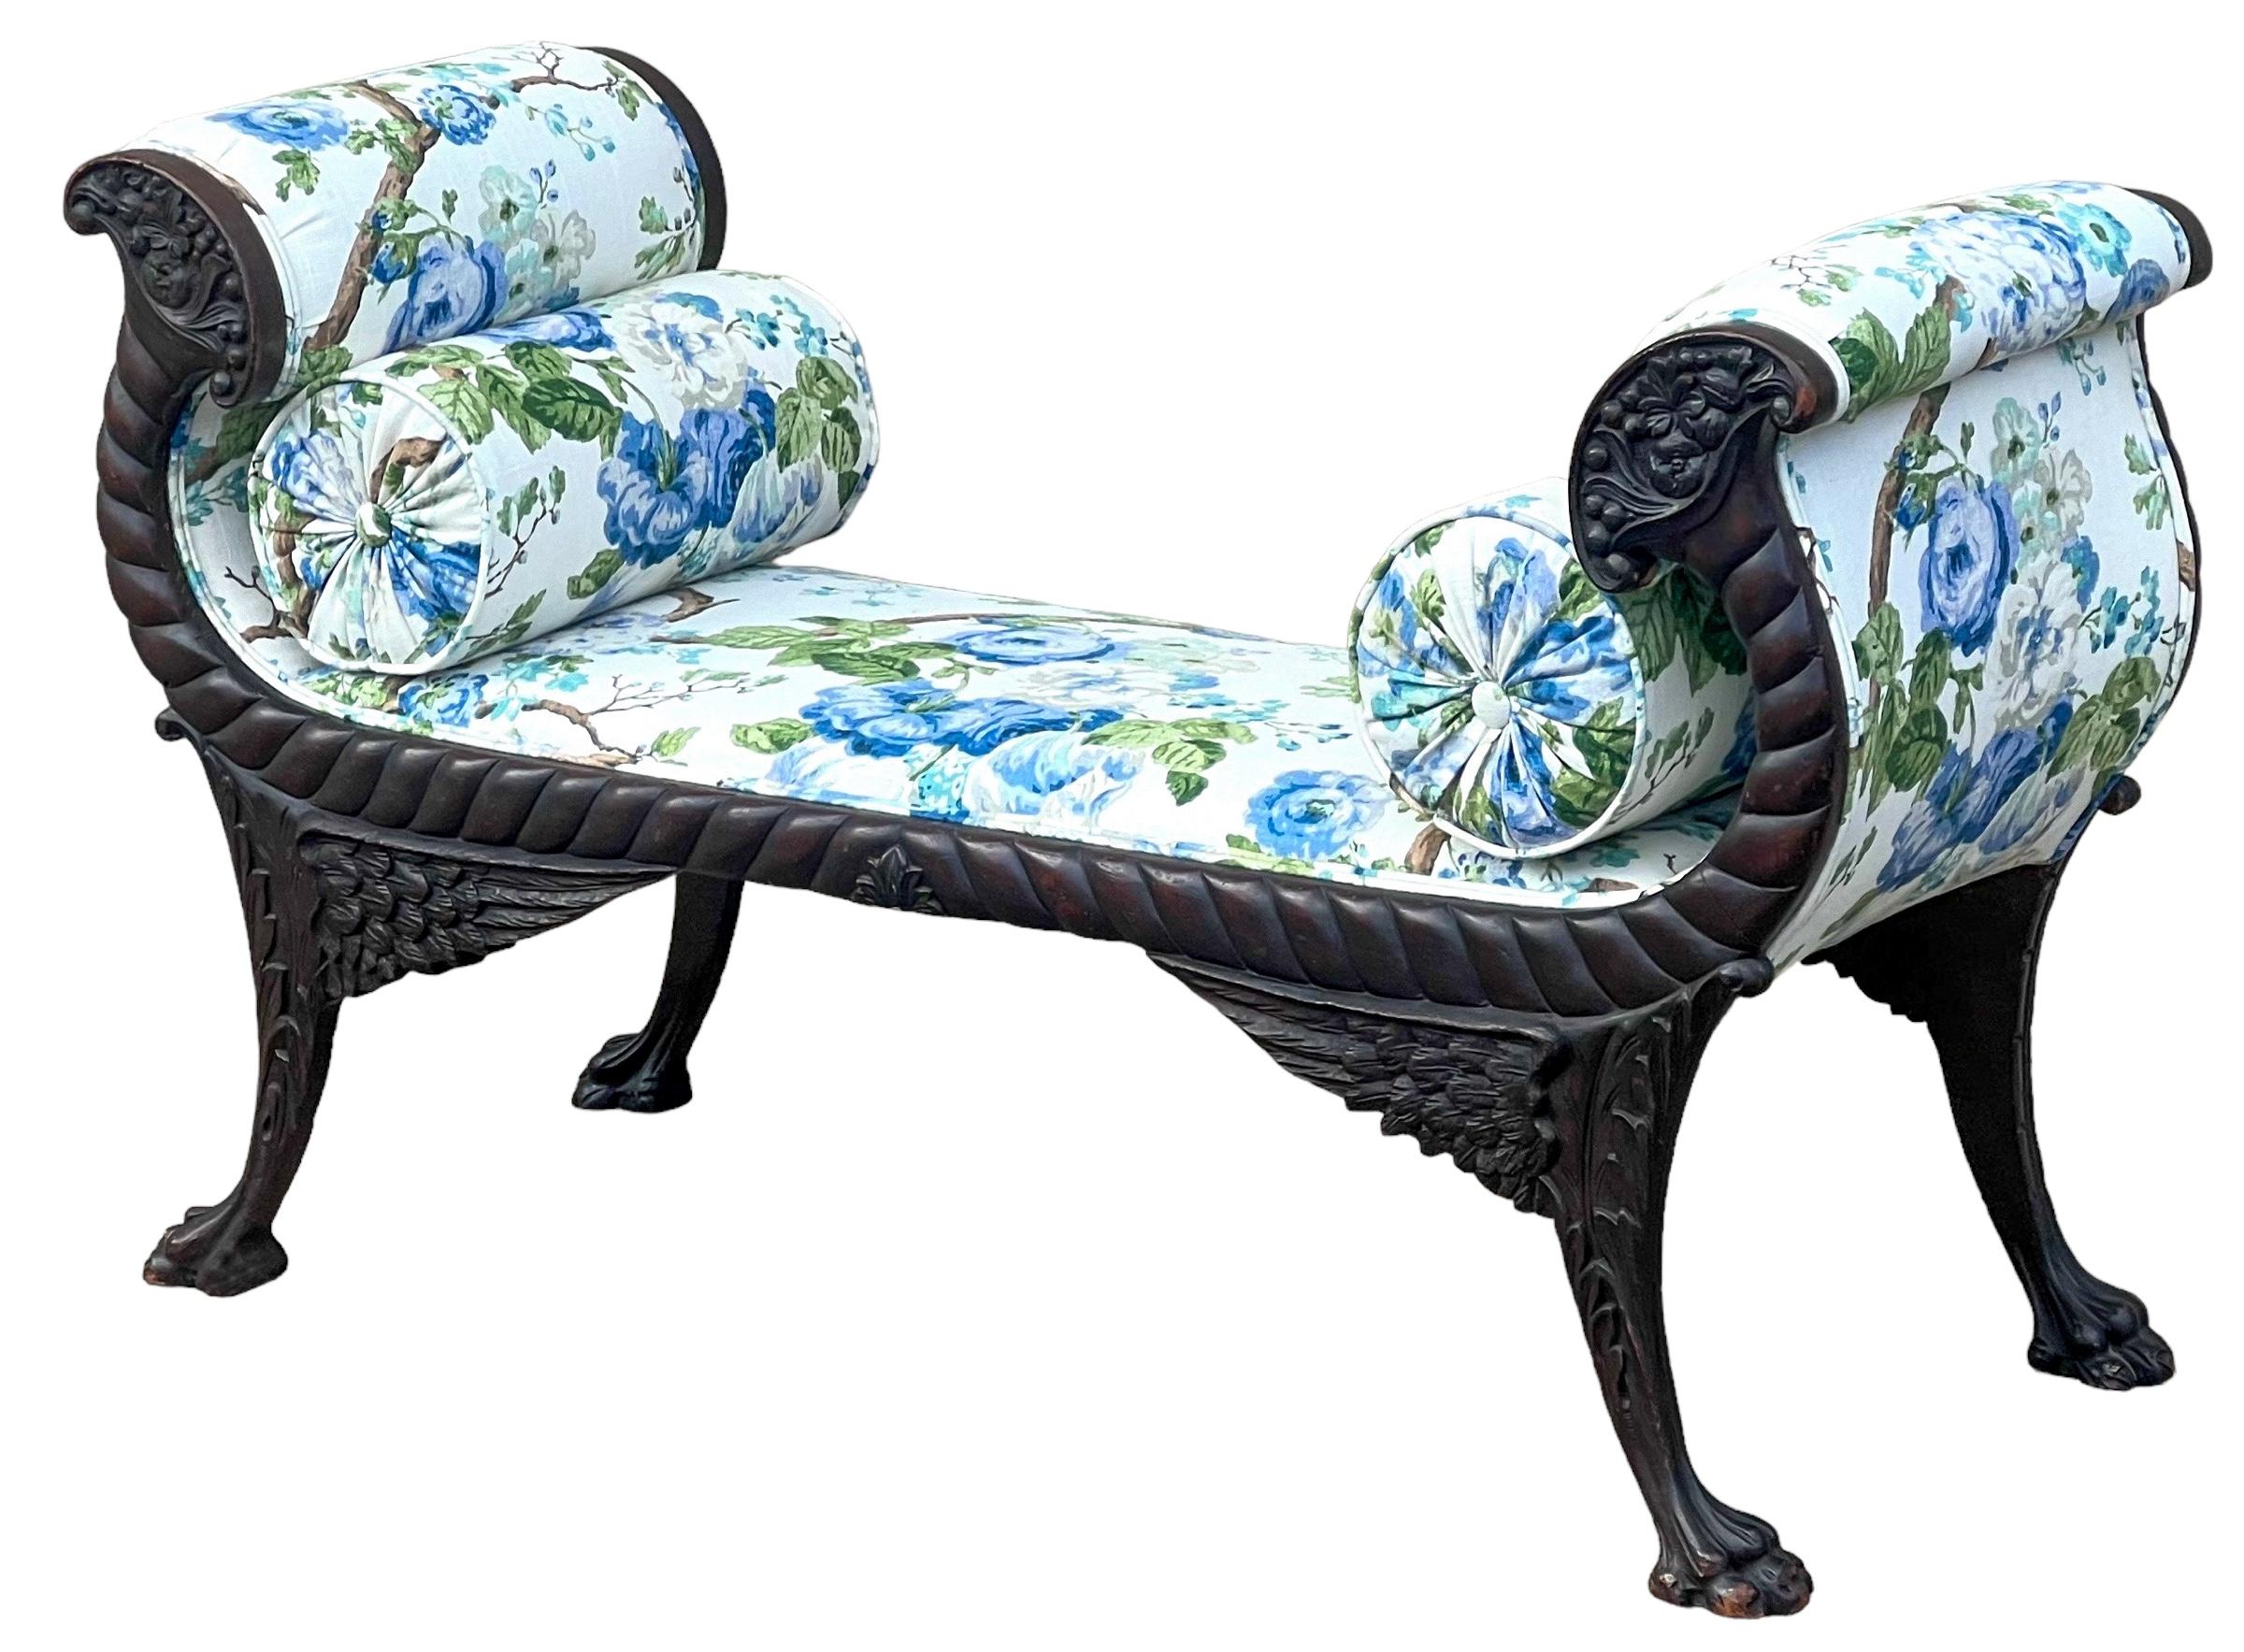 Antique American Empire Carved Mahogany Bench W/ Blue & White Floral Upholstery  For Sale 1